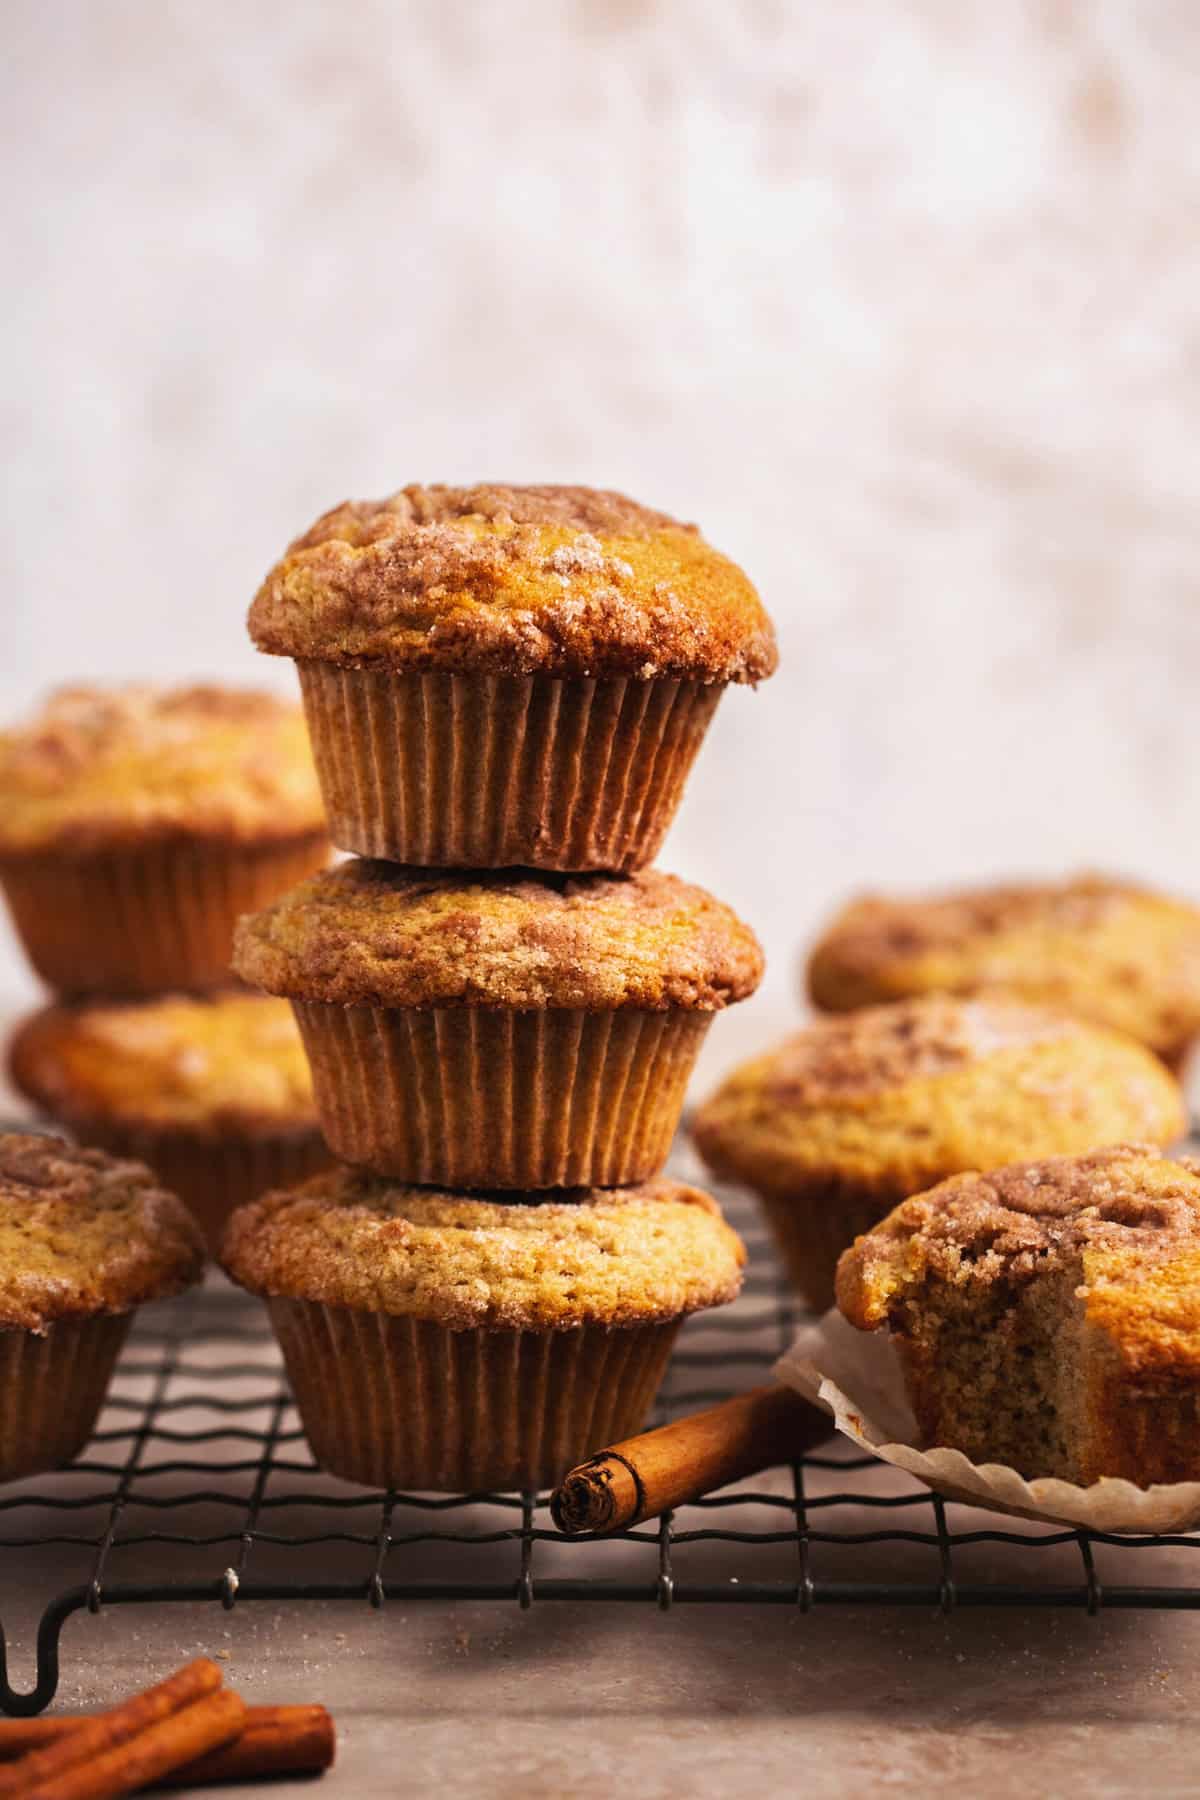 muffins stacked on cooling rack